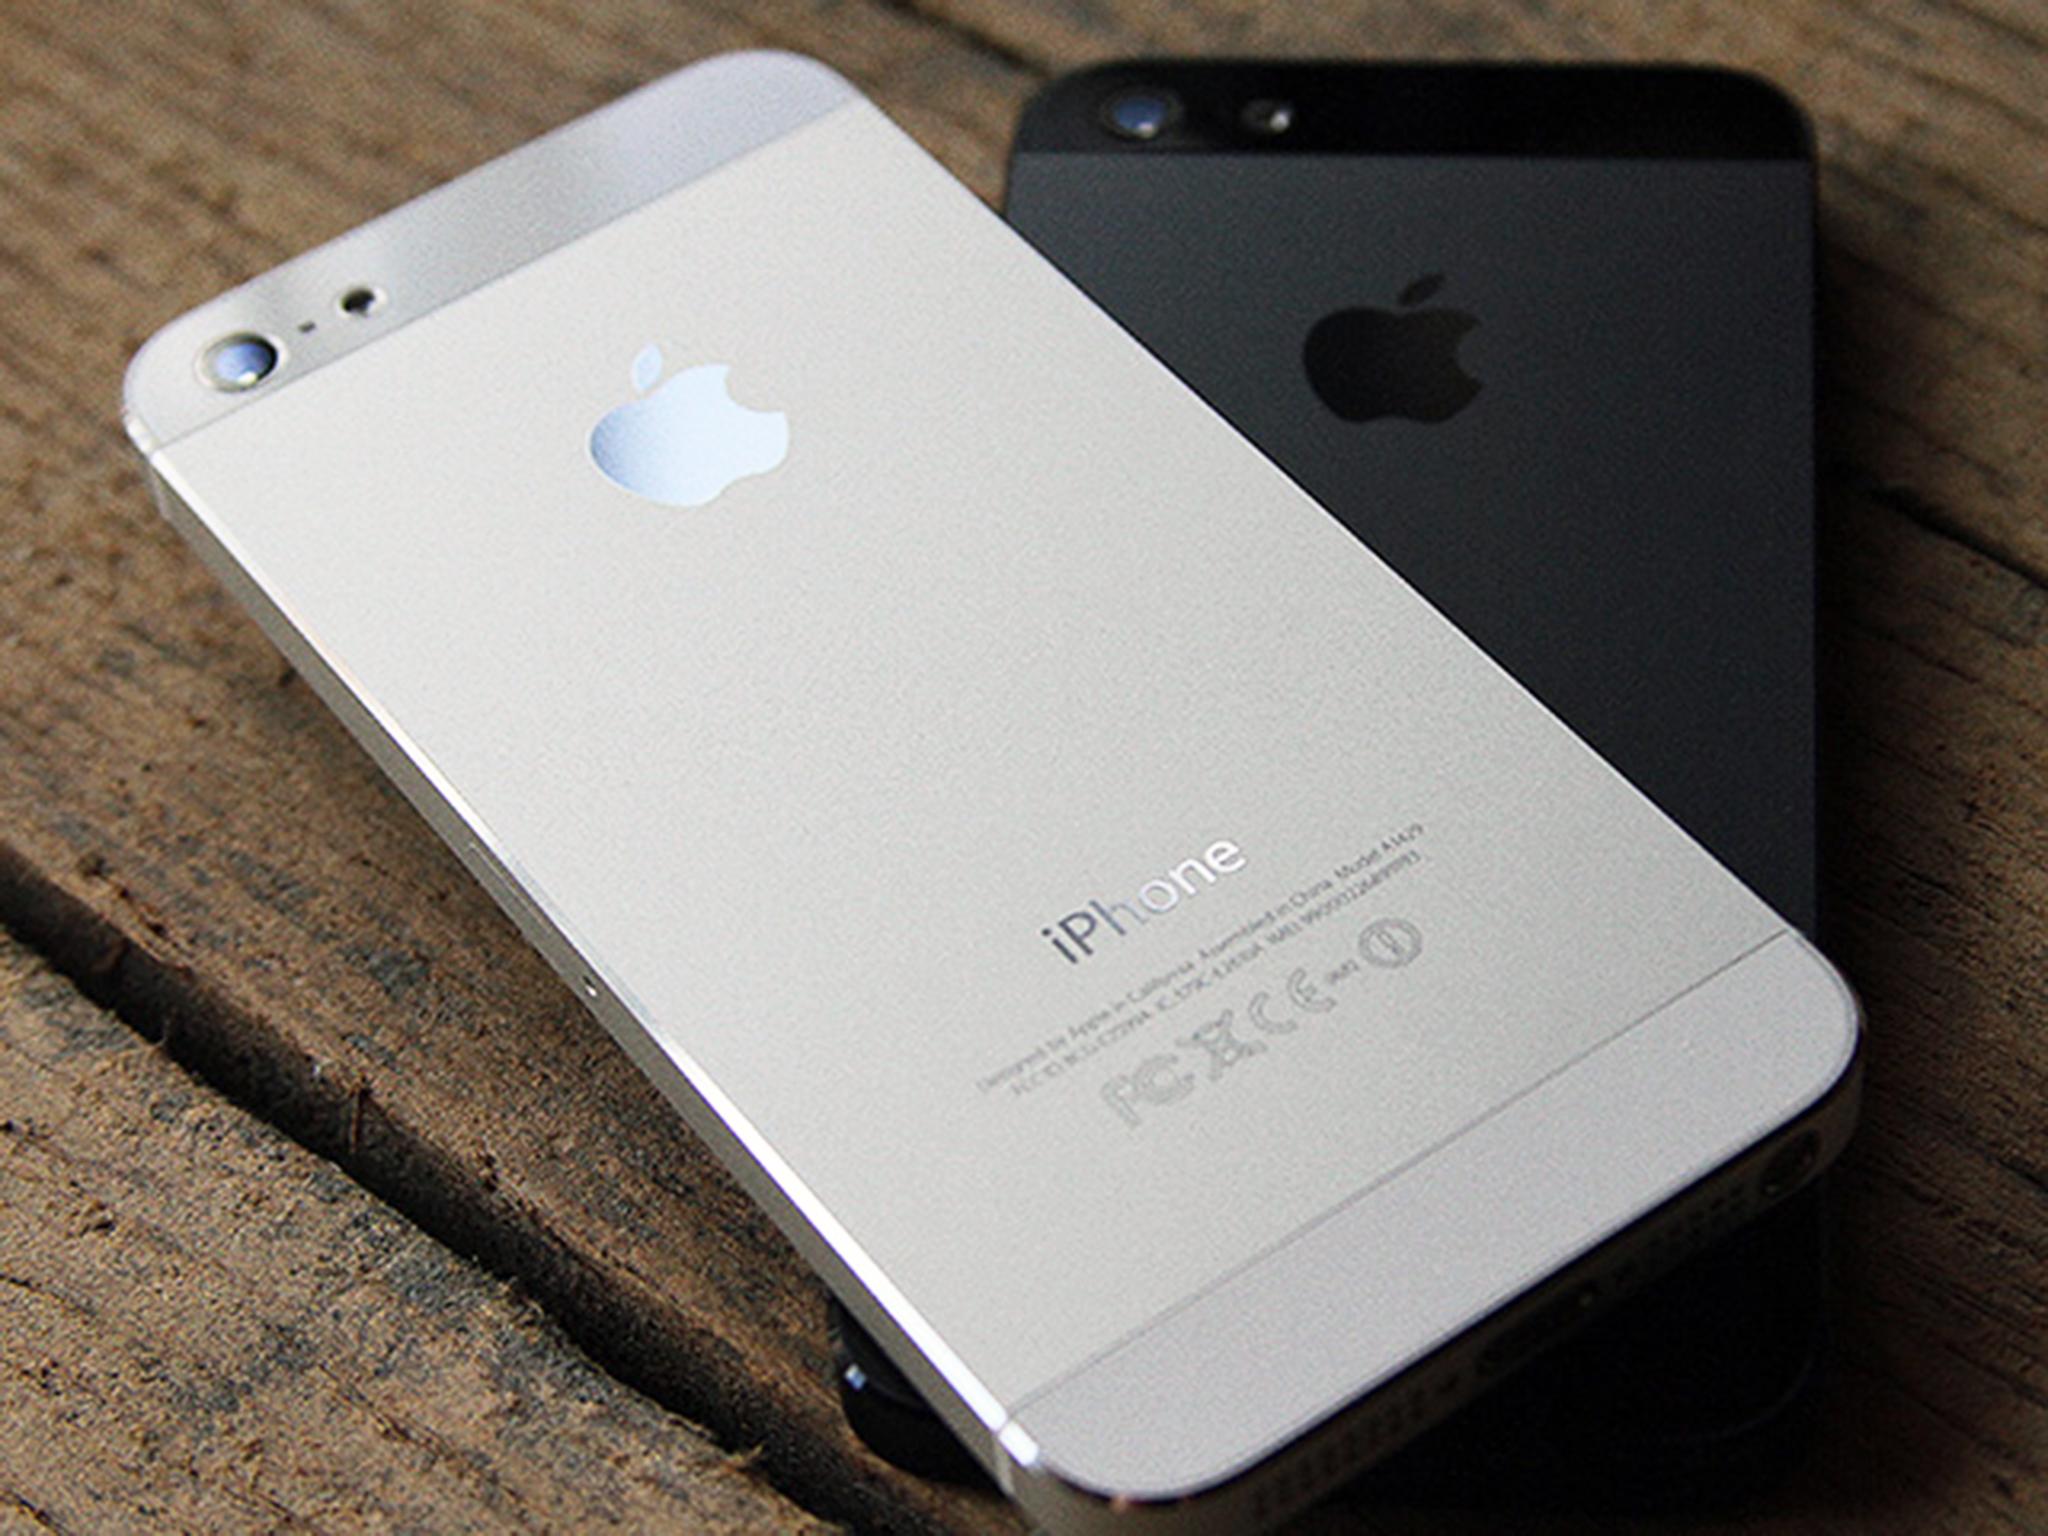 The iPhone 5 came out in 2012, and is one of the best-loved models